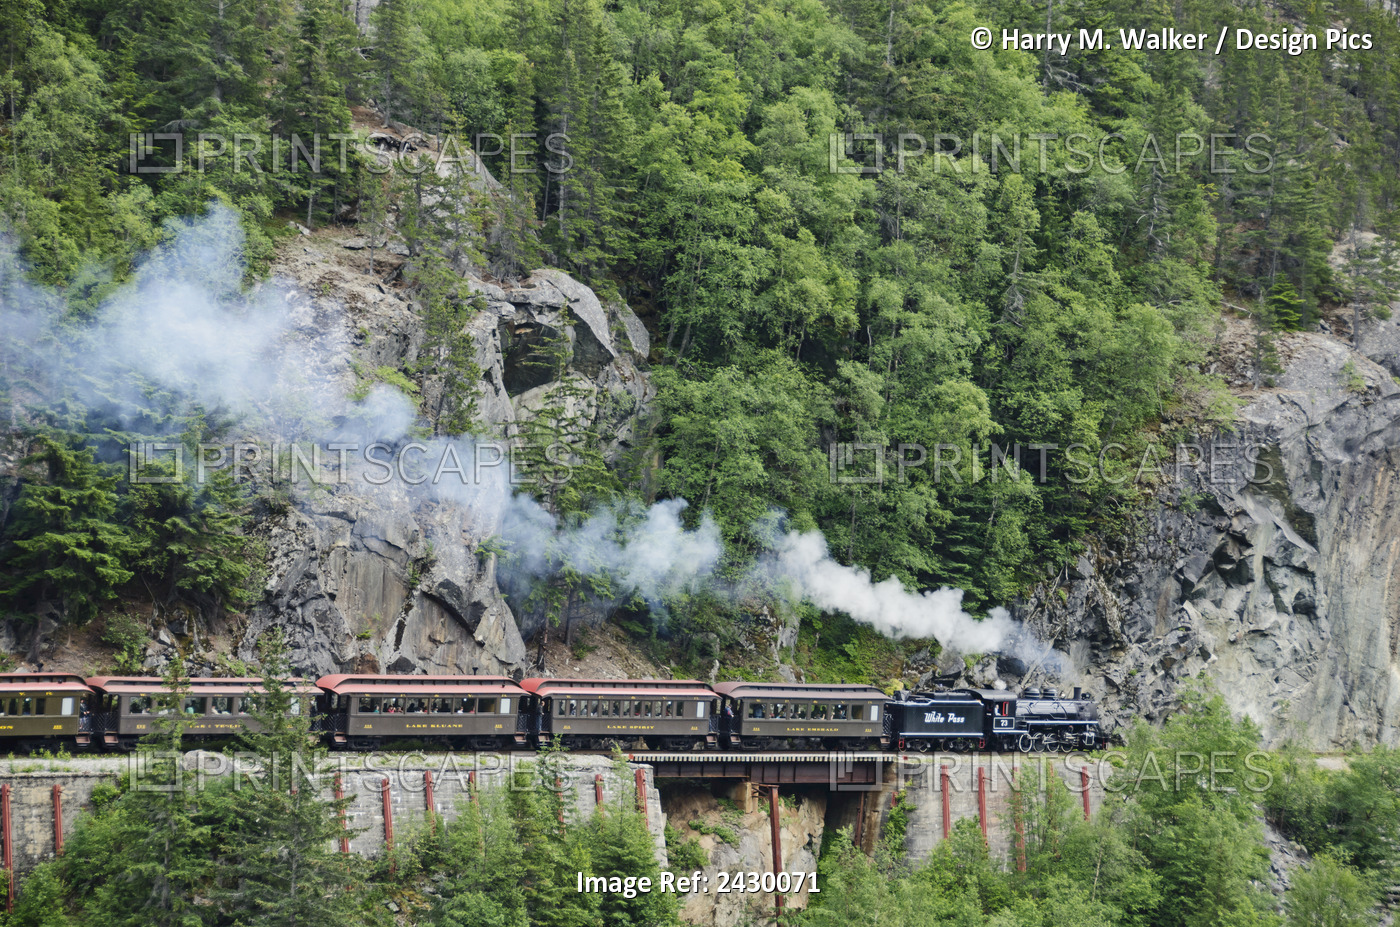 White Pass & Yukon Route Rr Steam Engine #73 Pulling Sightseeing Excursion ...